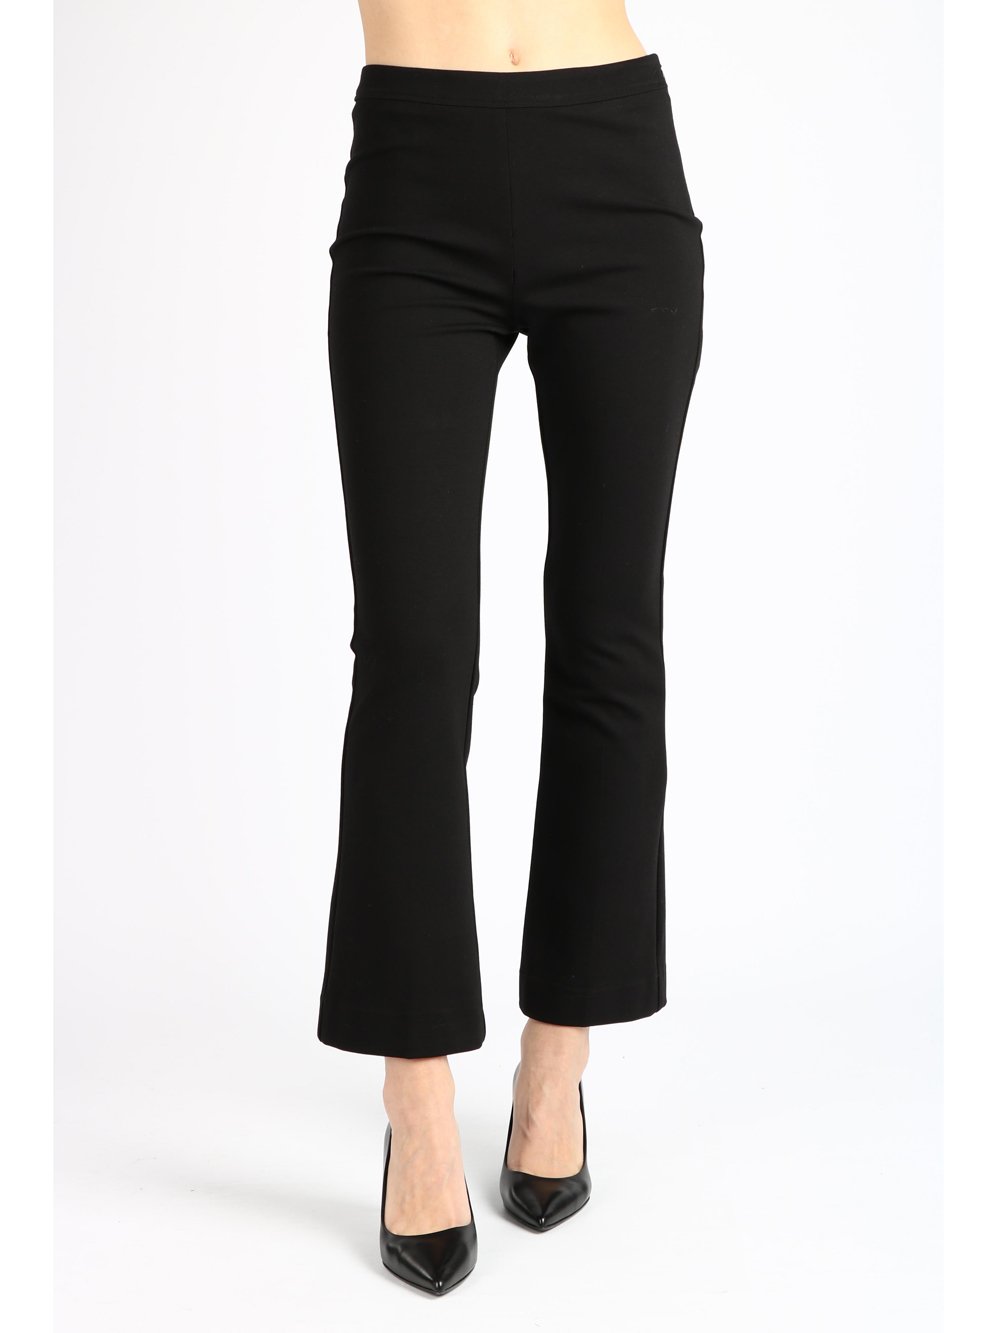 Women's trousers without pockets